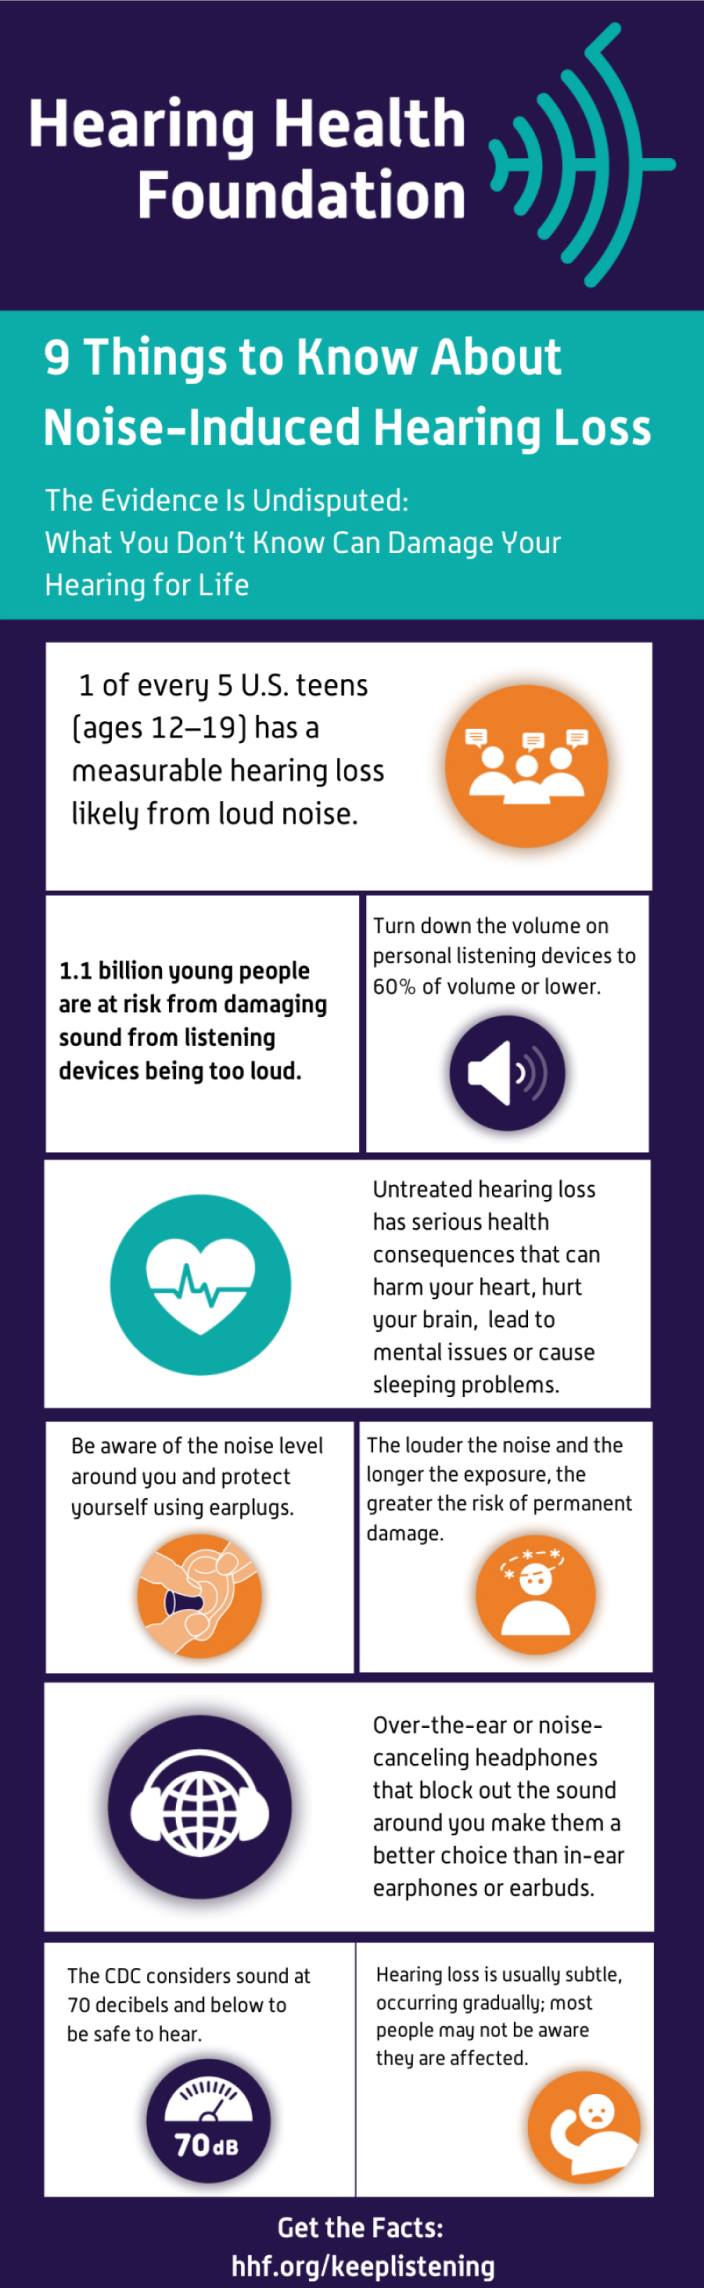 9 Things to Know About Noise Induced Hearing Loss